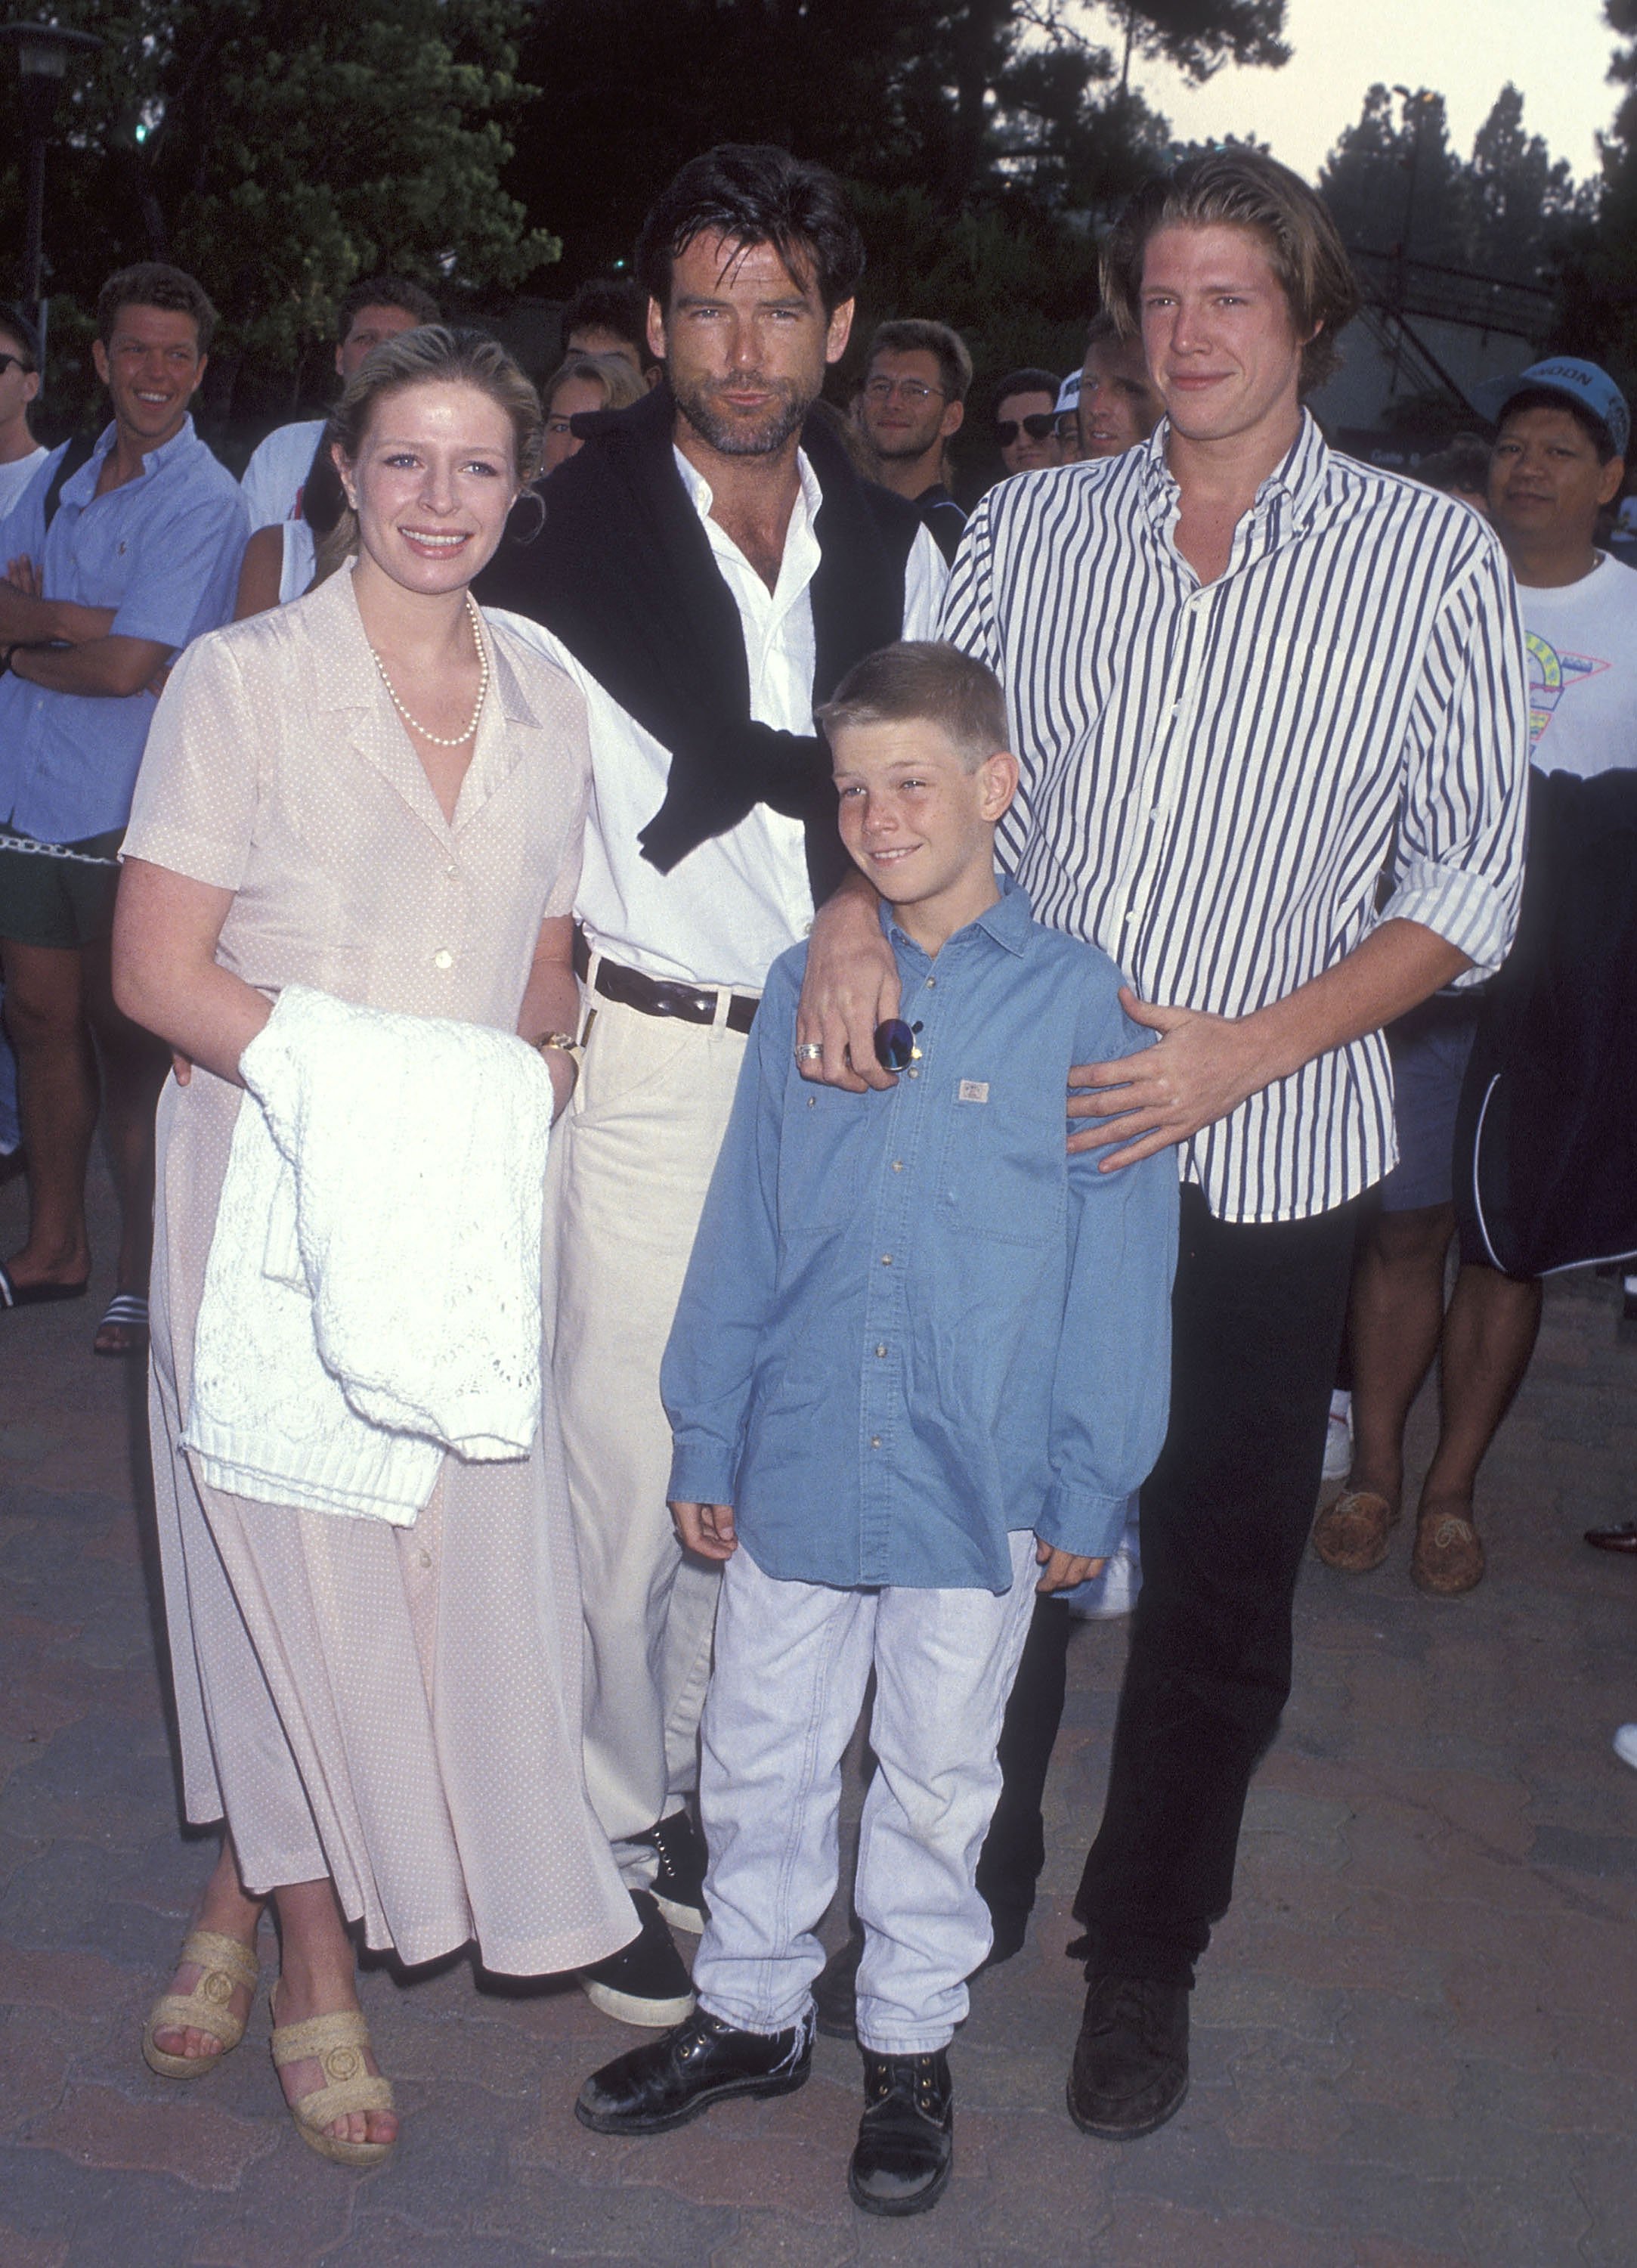 Actor Pierce Brosnan, son Christopher Brosnan, daughter Charlotte Brosnan and son Sean Brosnan attend "An Evening at the Net" Benefit for Revlon/UCLA Women's Cancer Research Program to Kick-Off the 67th Annual ATP Los Angeles Open on August 2, 1993 | Source: Getty Images